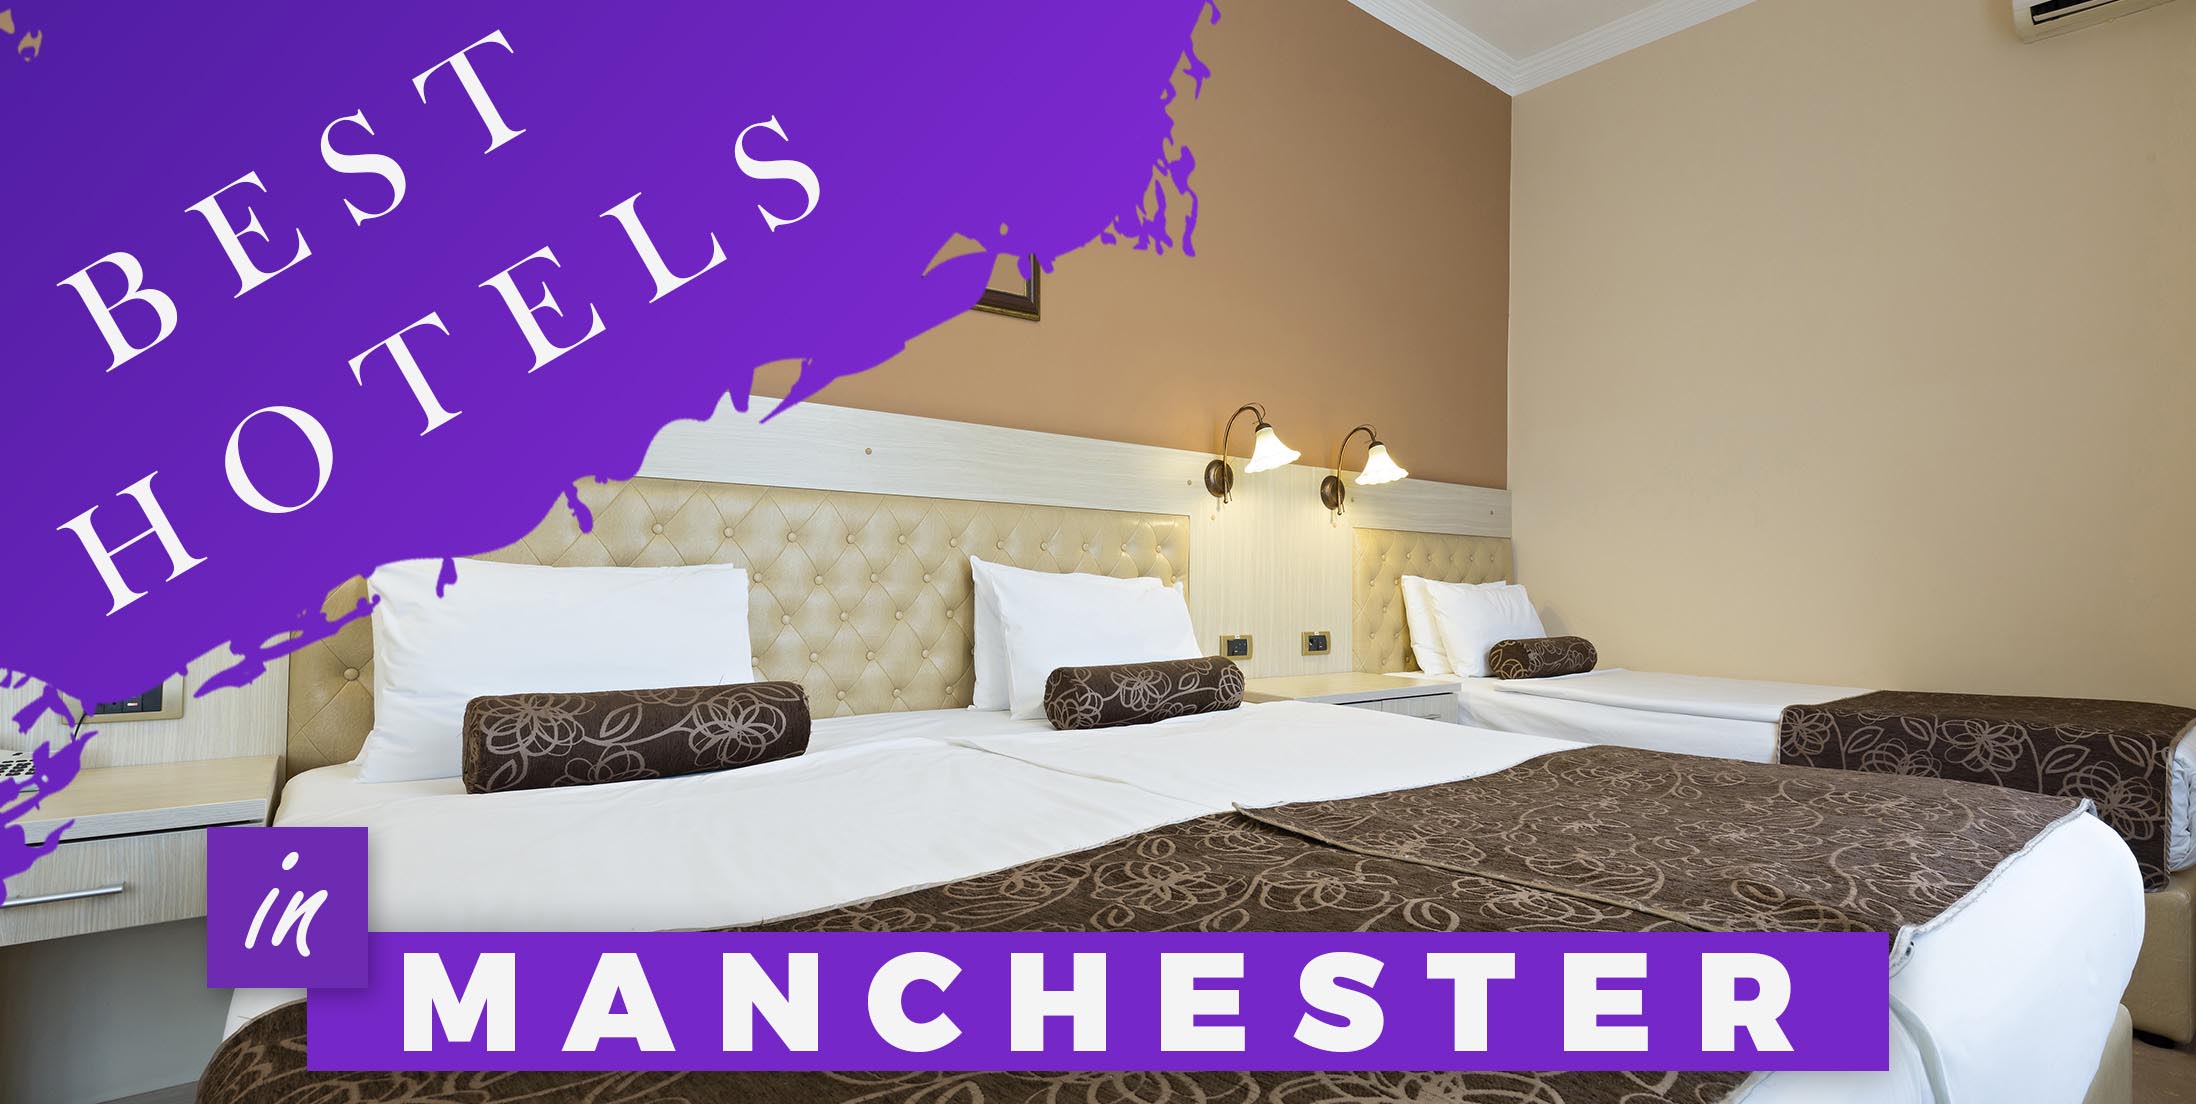 Best Hotels in Manchester